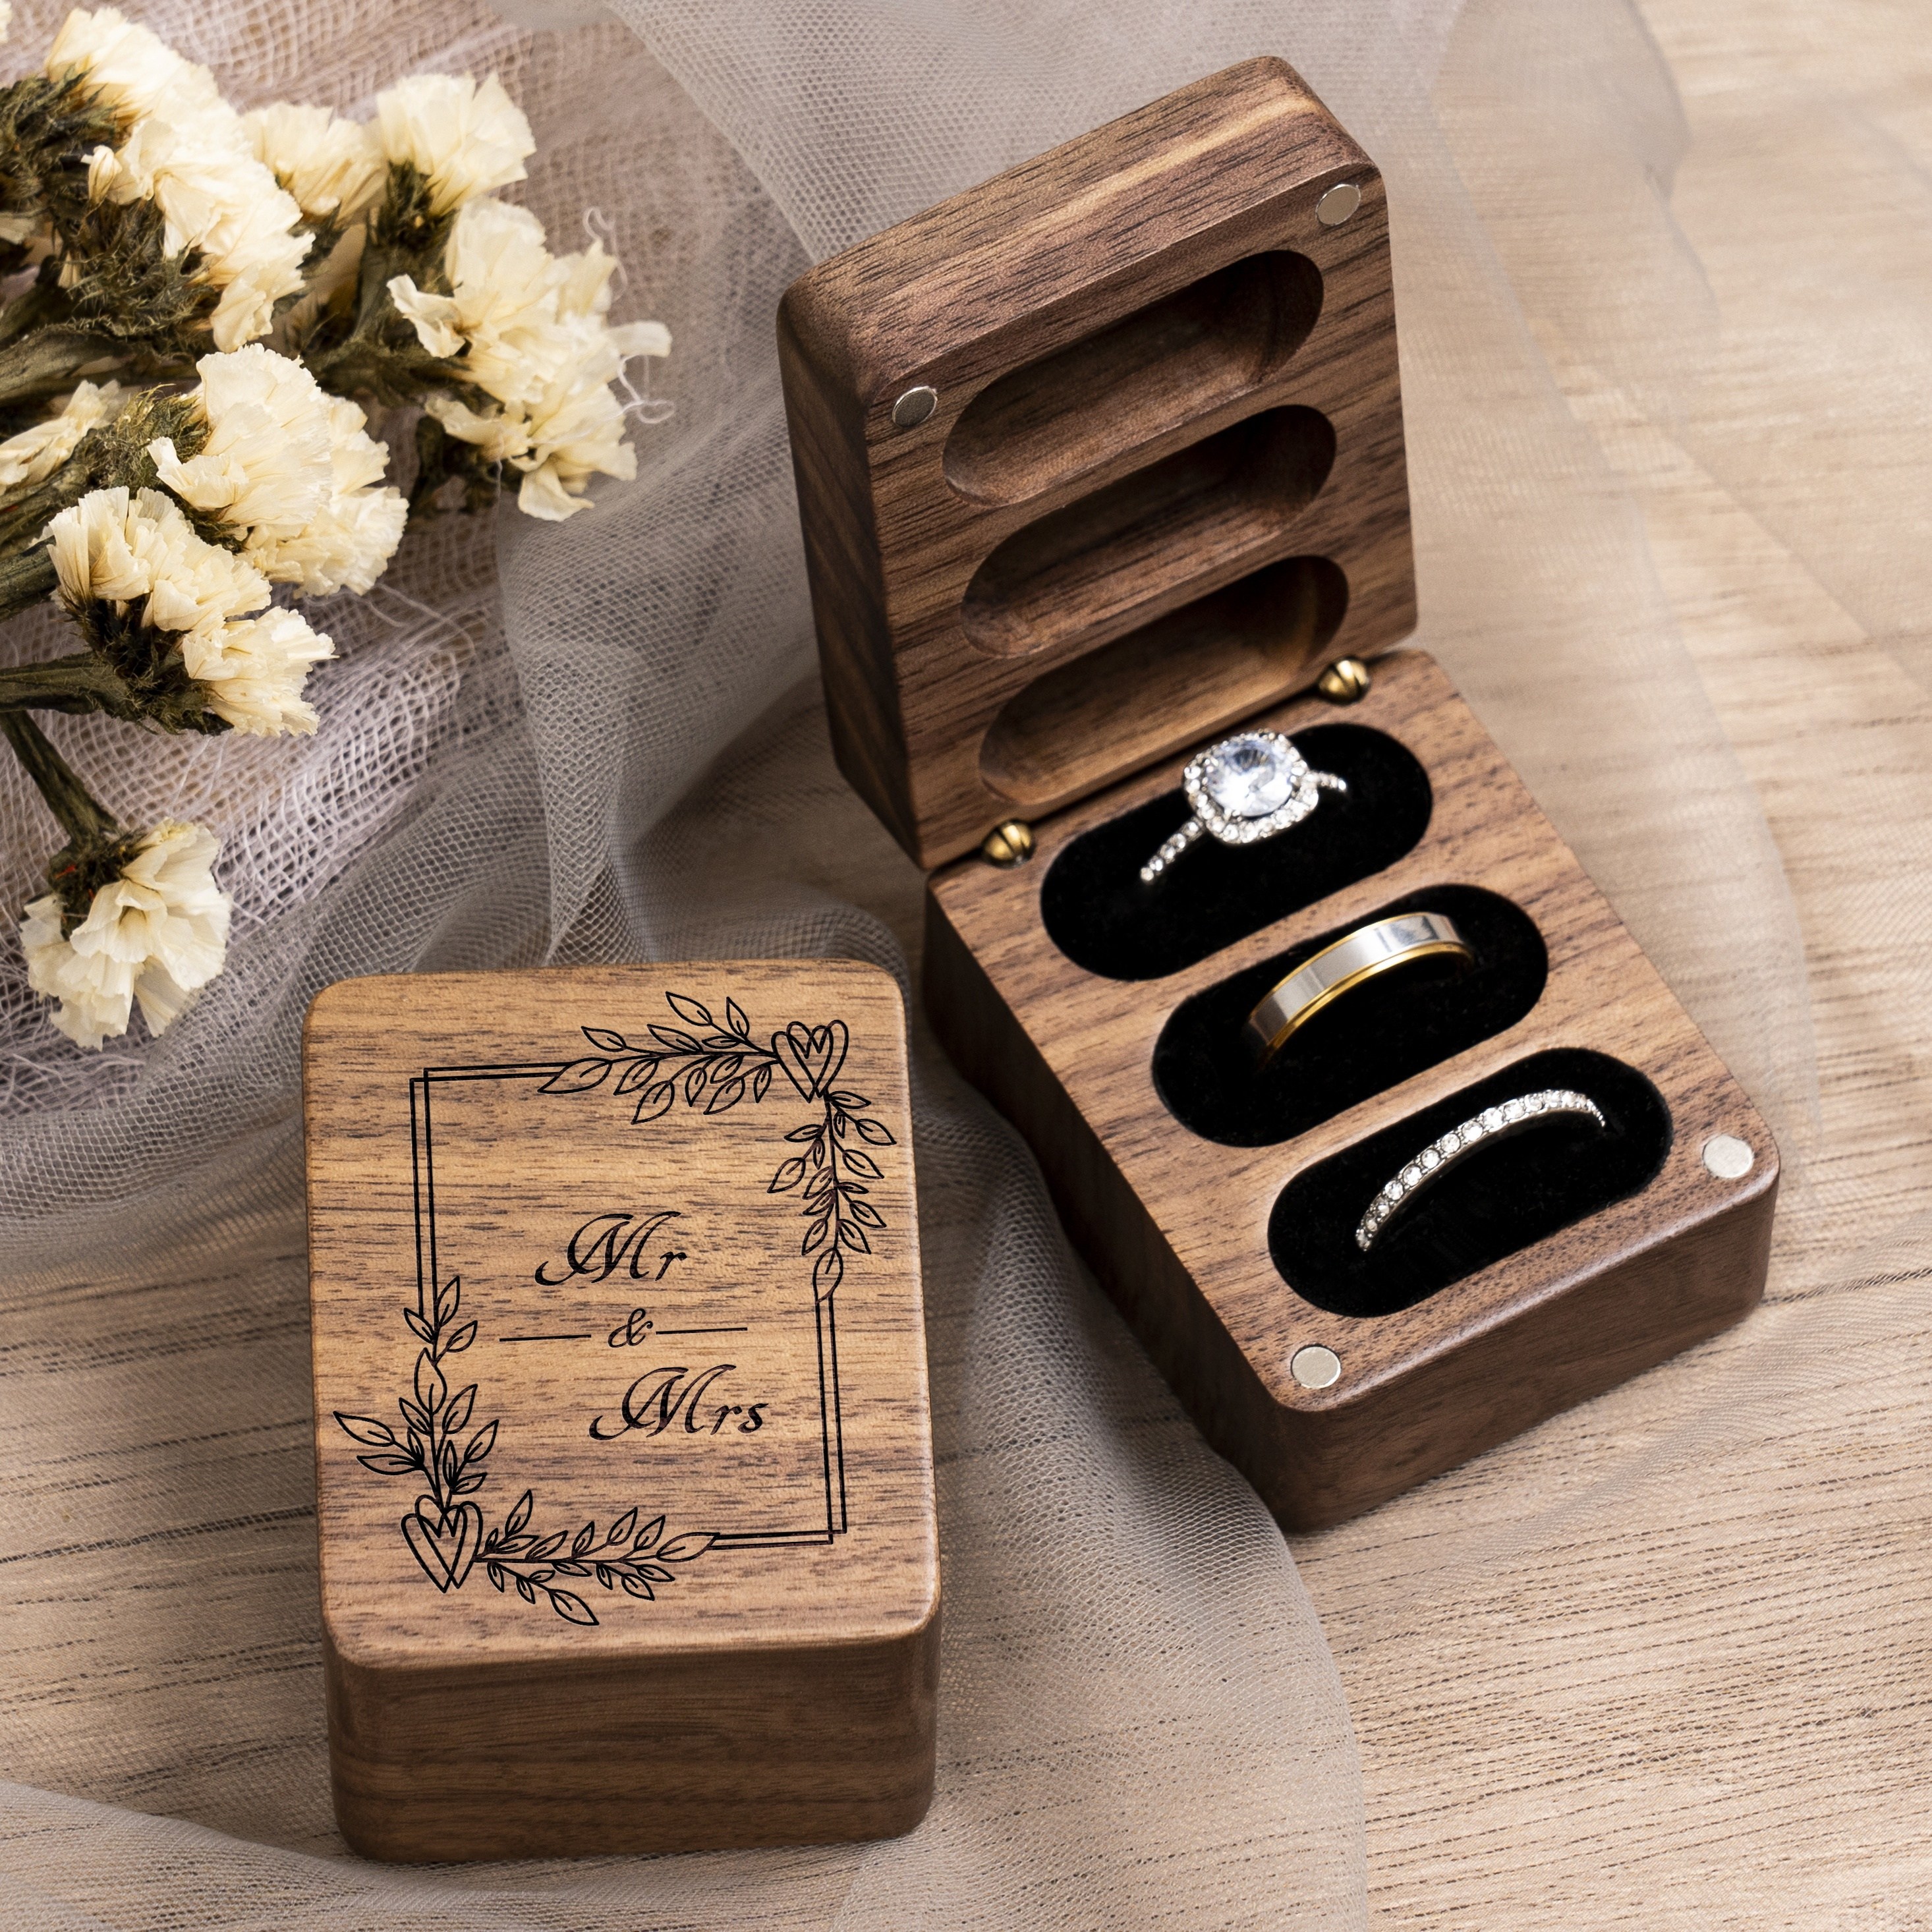 

Mr & Mrs 3 Slot Ring Box, Engraved Triple Wooden Ring Display Case Box For Wedding Ceremony Ring Bearer Upscale Anniversary Birthday Gift Ideas